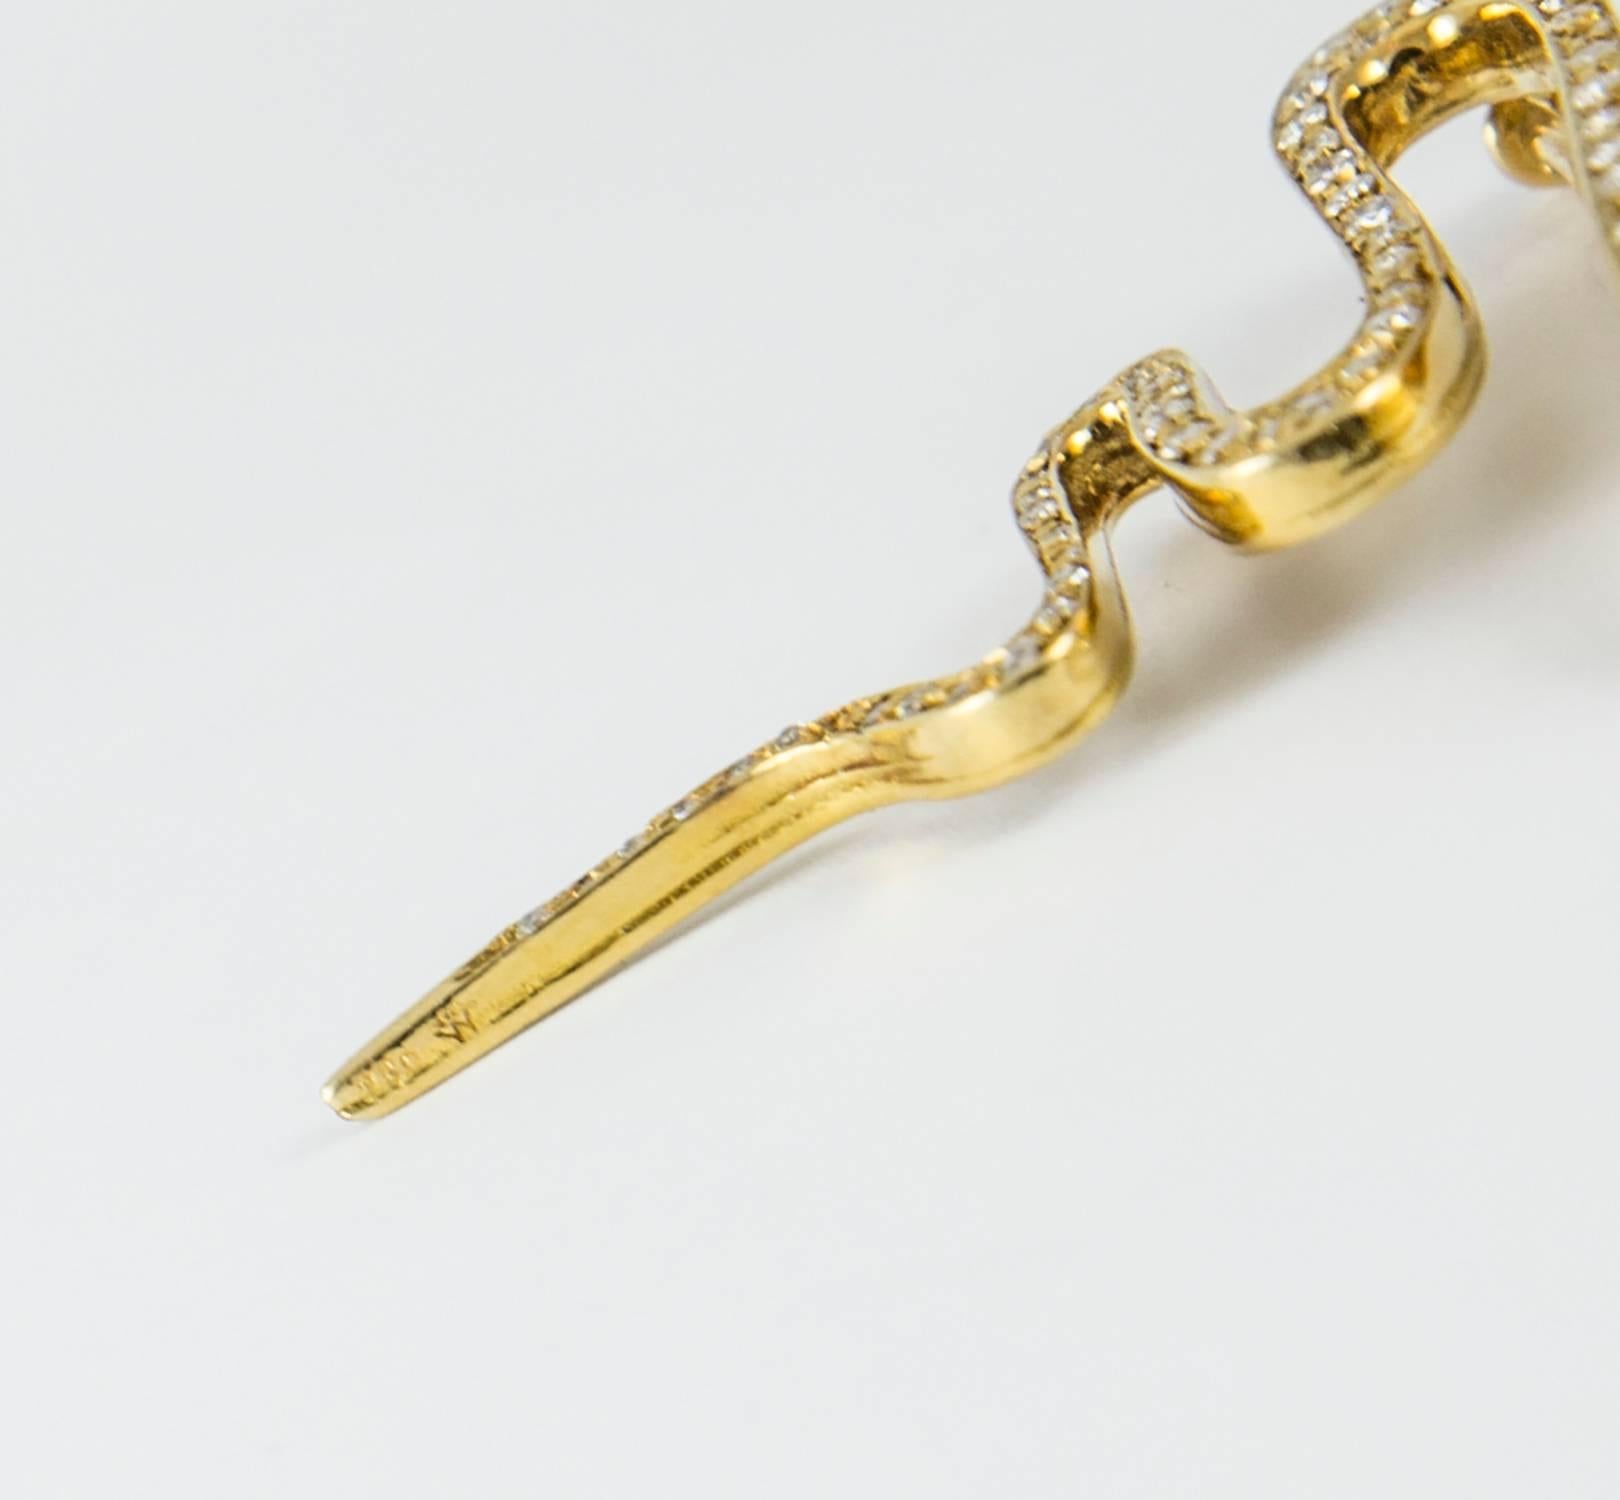 A handsome snake brooch set in 18k yellow gold. It holds 95 round brilliant cut diamonds (.85, G-H-I, VS-SI). A bright red ruby is set on the top of his head forming a striking medallion. The brooch measures 2.5 inches in length and 1.5 inches